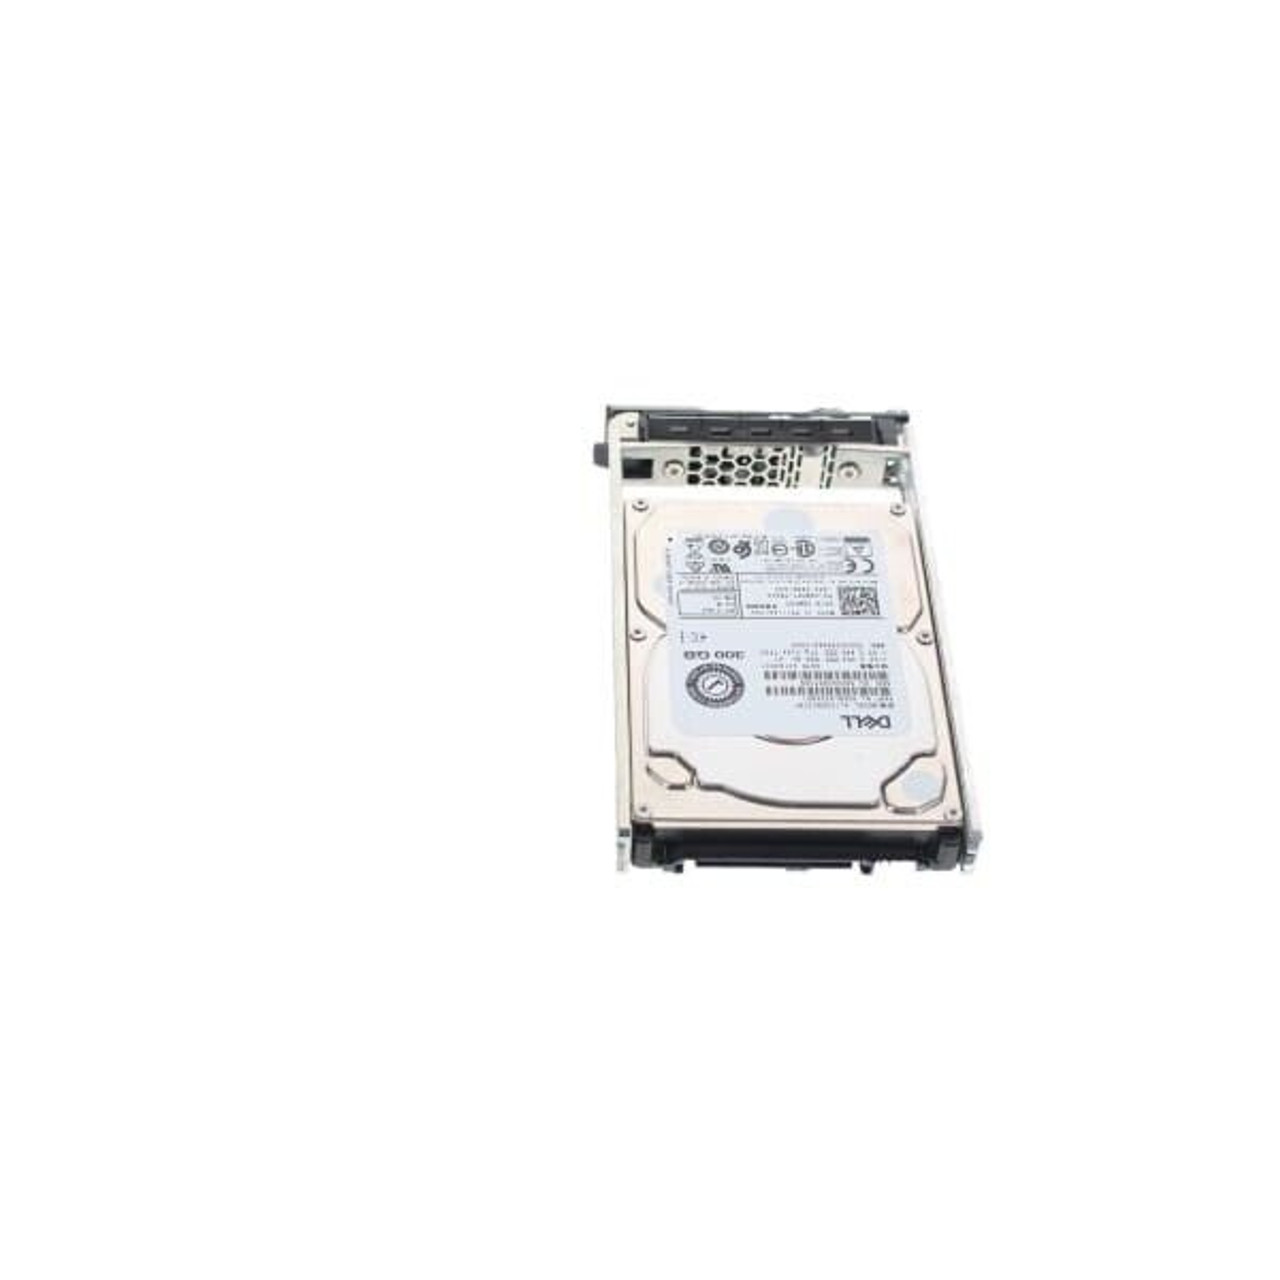 Dell GWFRY 300GB 10K SAS 12Gbps 2.5" Hard Drive w60